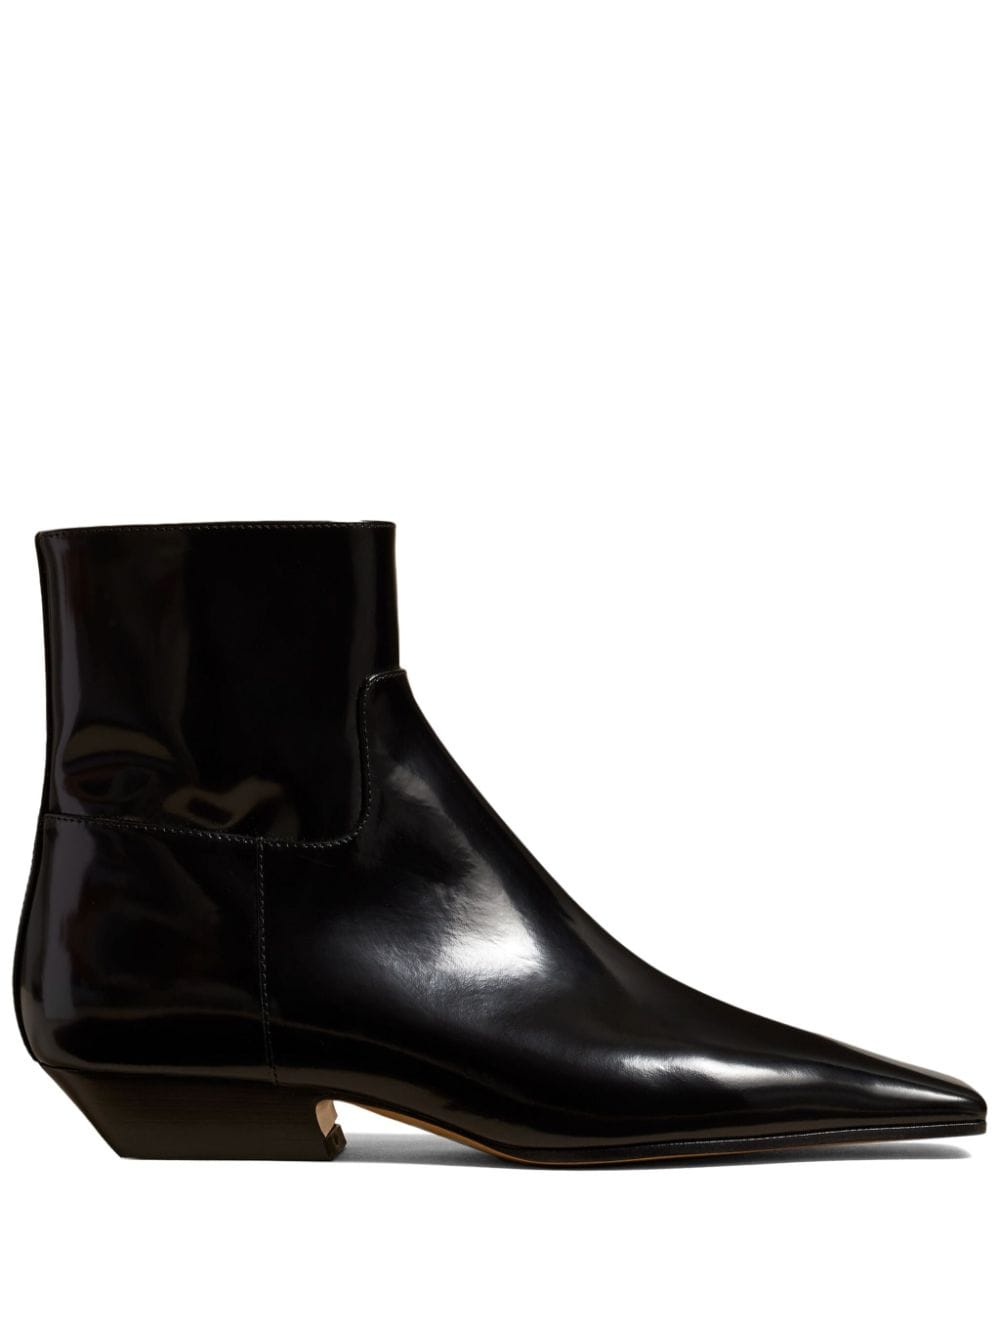 The Marfa ankle leather boots